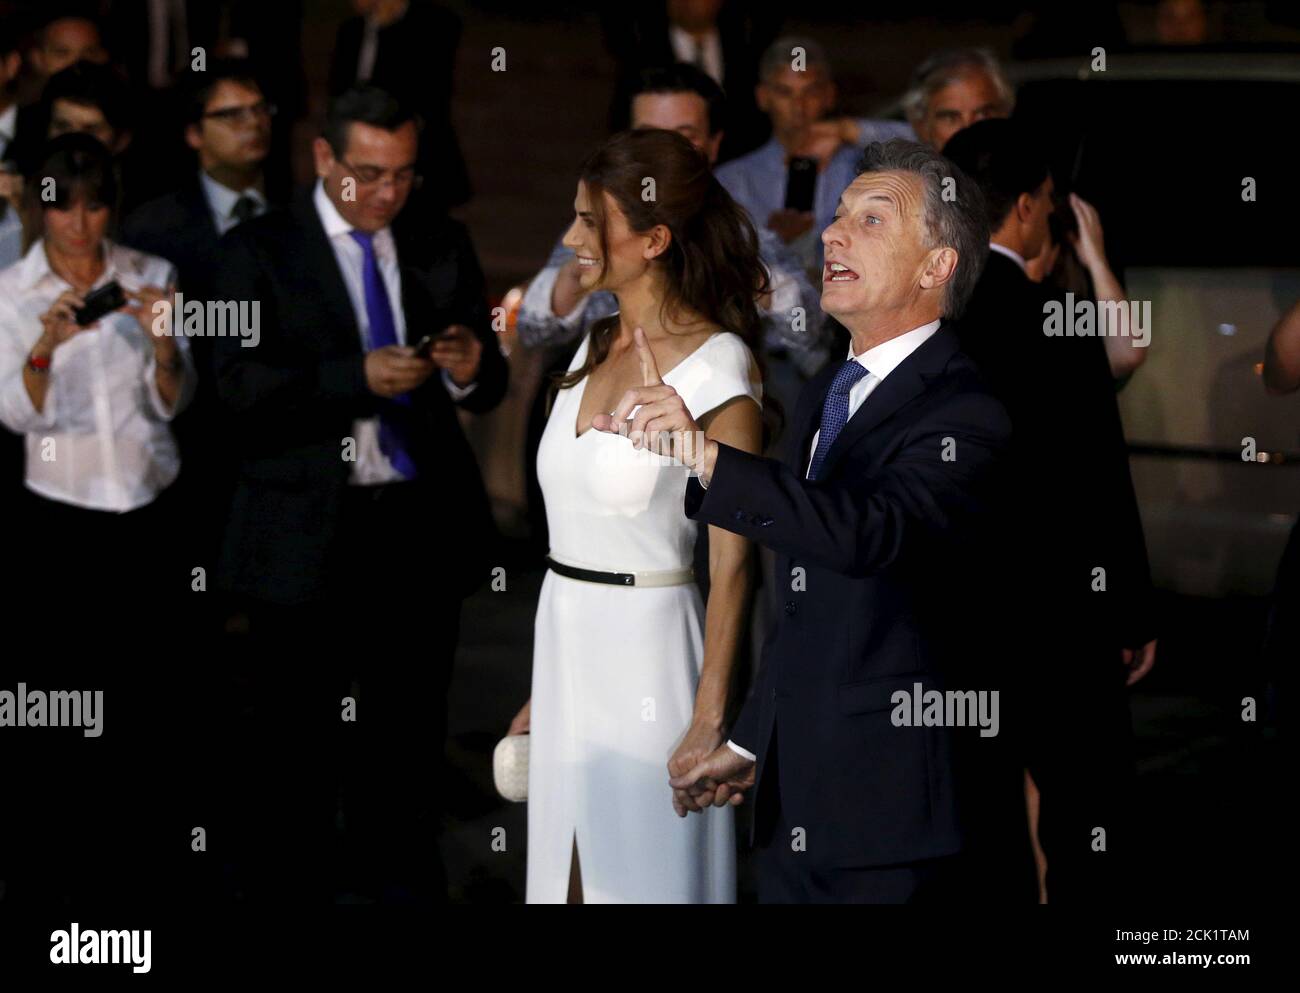 Argentina's President Mauricio Macri (R) gestures next to First Lady Juliana Awada after arriving for a gala at the Teatro Colon (Colon Theatre) in Buenos Aires December 10, 2015. Macri took office as Argentina's first non-Peronist president in more than a decade on Thursday, promising to end policies of leftist populism and revive the South American country's ailing economy. Macri began his 4-year term in a ceremony snubbed by his predecessor, Cristina Fernandez de Kirchner, following a rancorous argument over where the handover of power should take place.  REUTERS/Andres Stapff Stock Photo